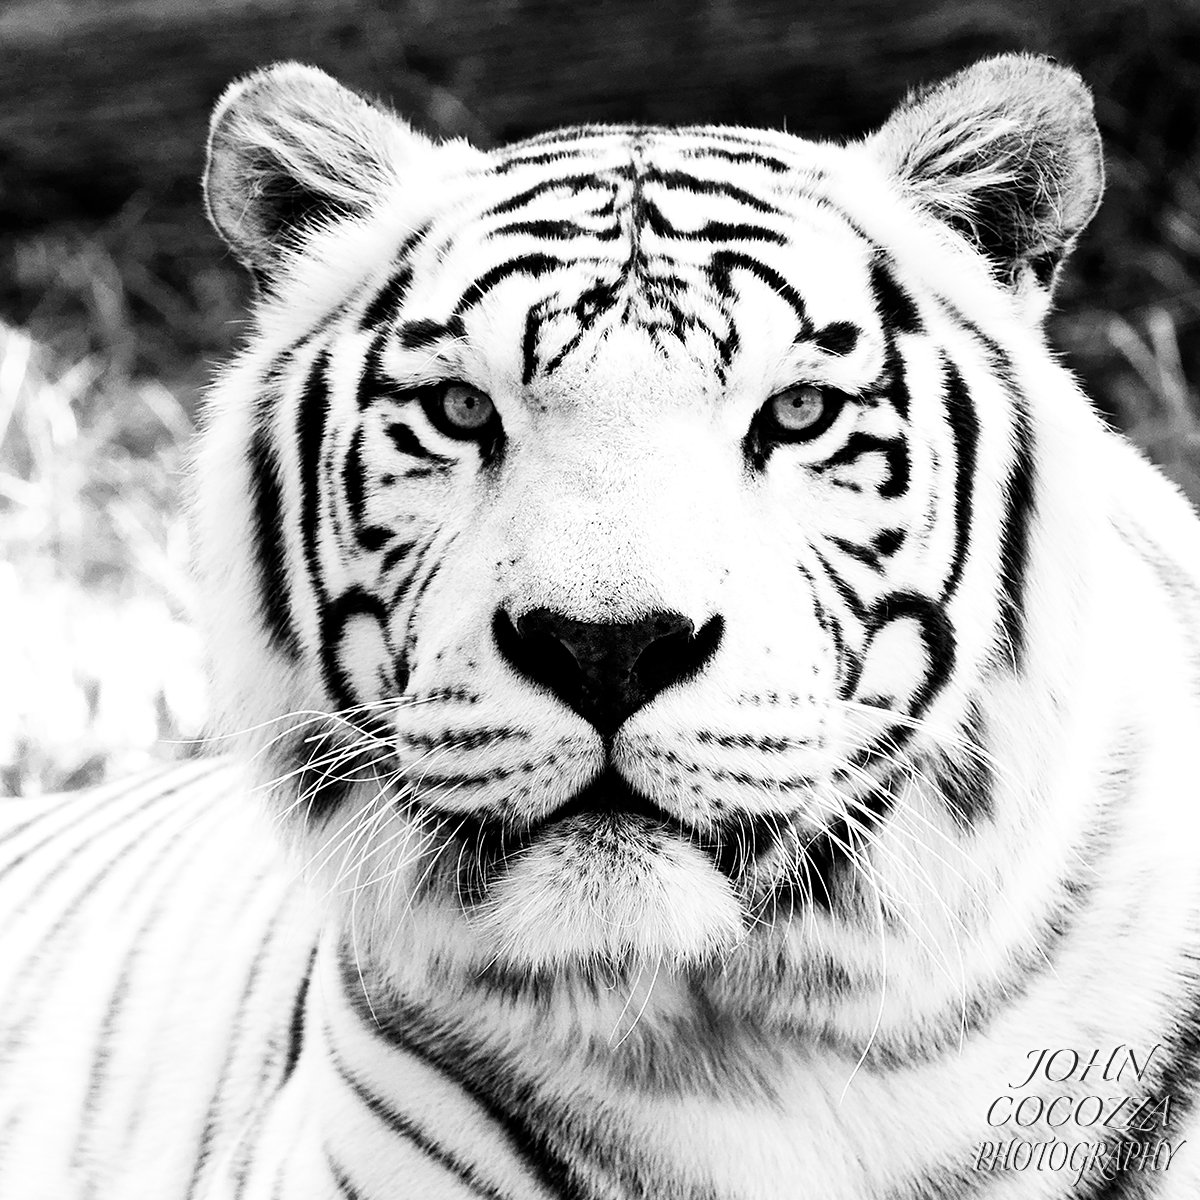 The White Tiger with the curled mustache.
.
If you would like a print for your home or office then message me via JohnCocozzaPhotography.com 
.
#tigers #tigerphotos #wildnature #nature #wildlifephotos #wildlifephotography #cats #catlovers #blackandwhite